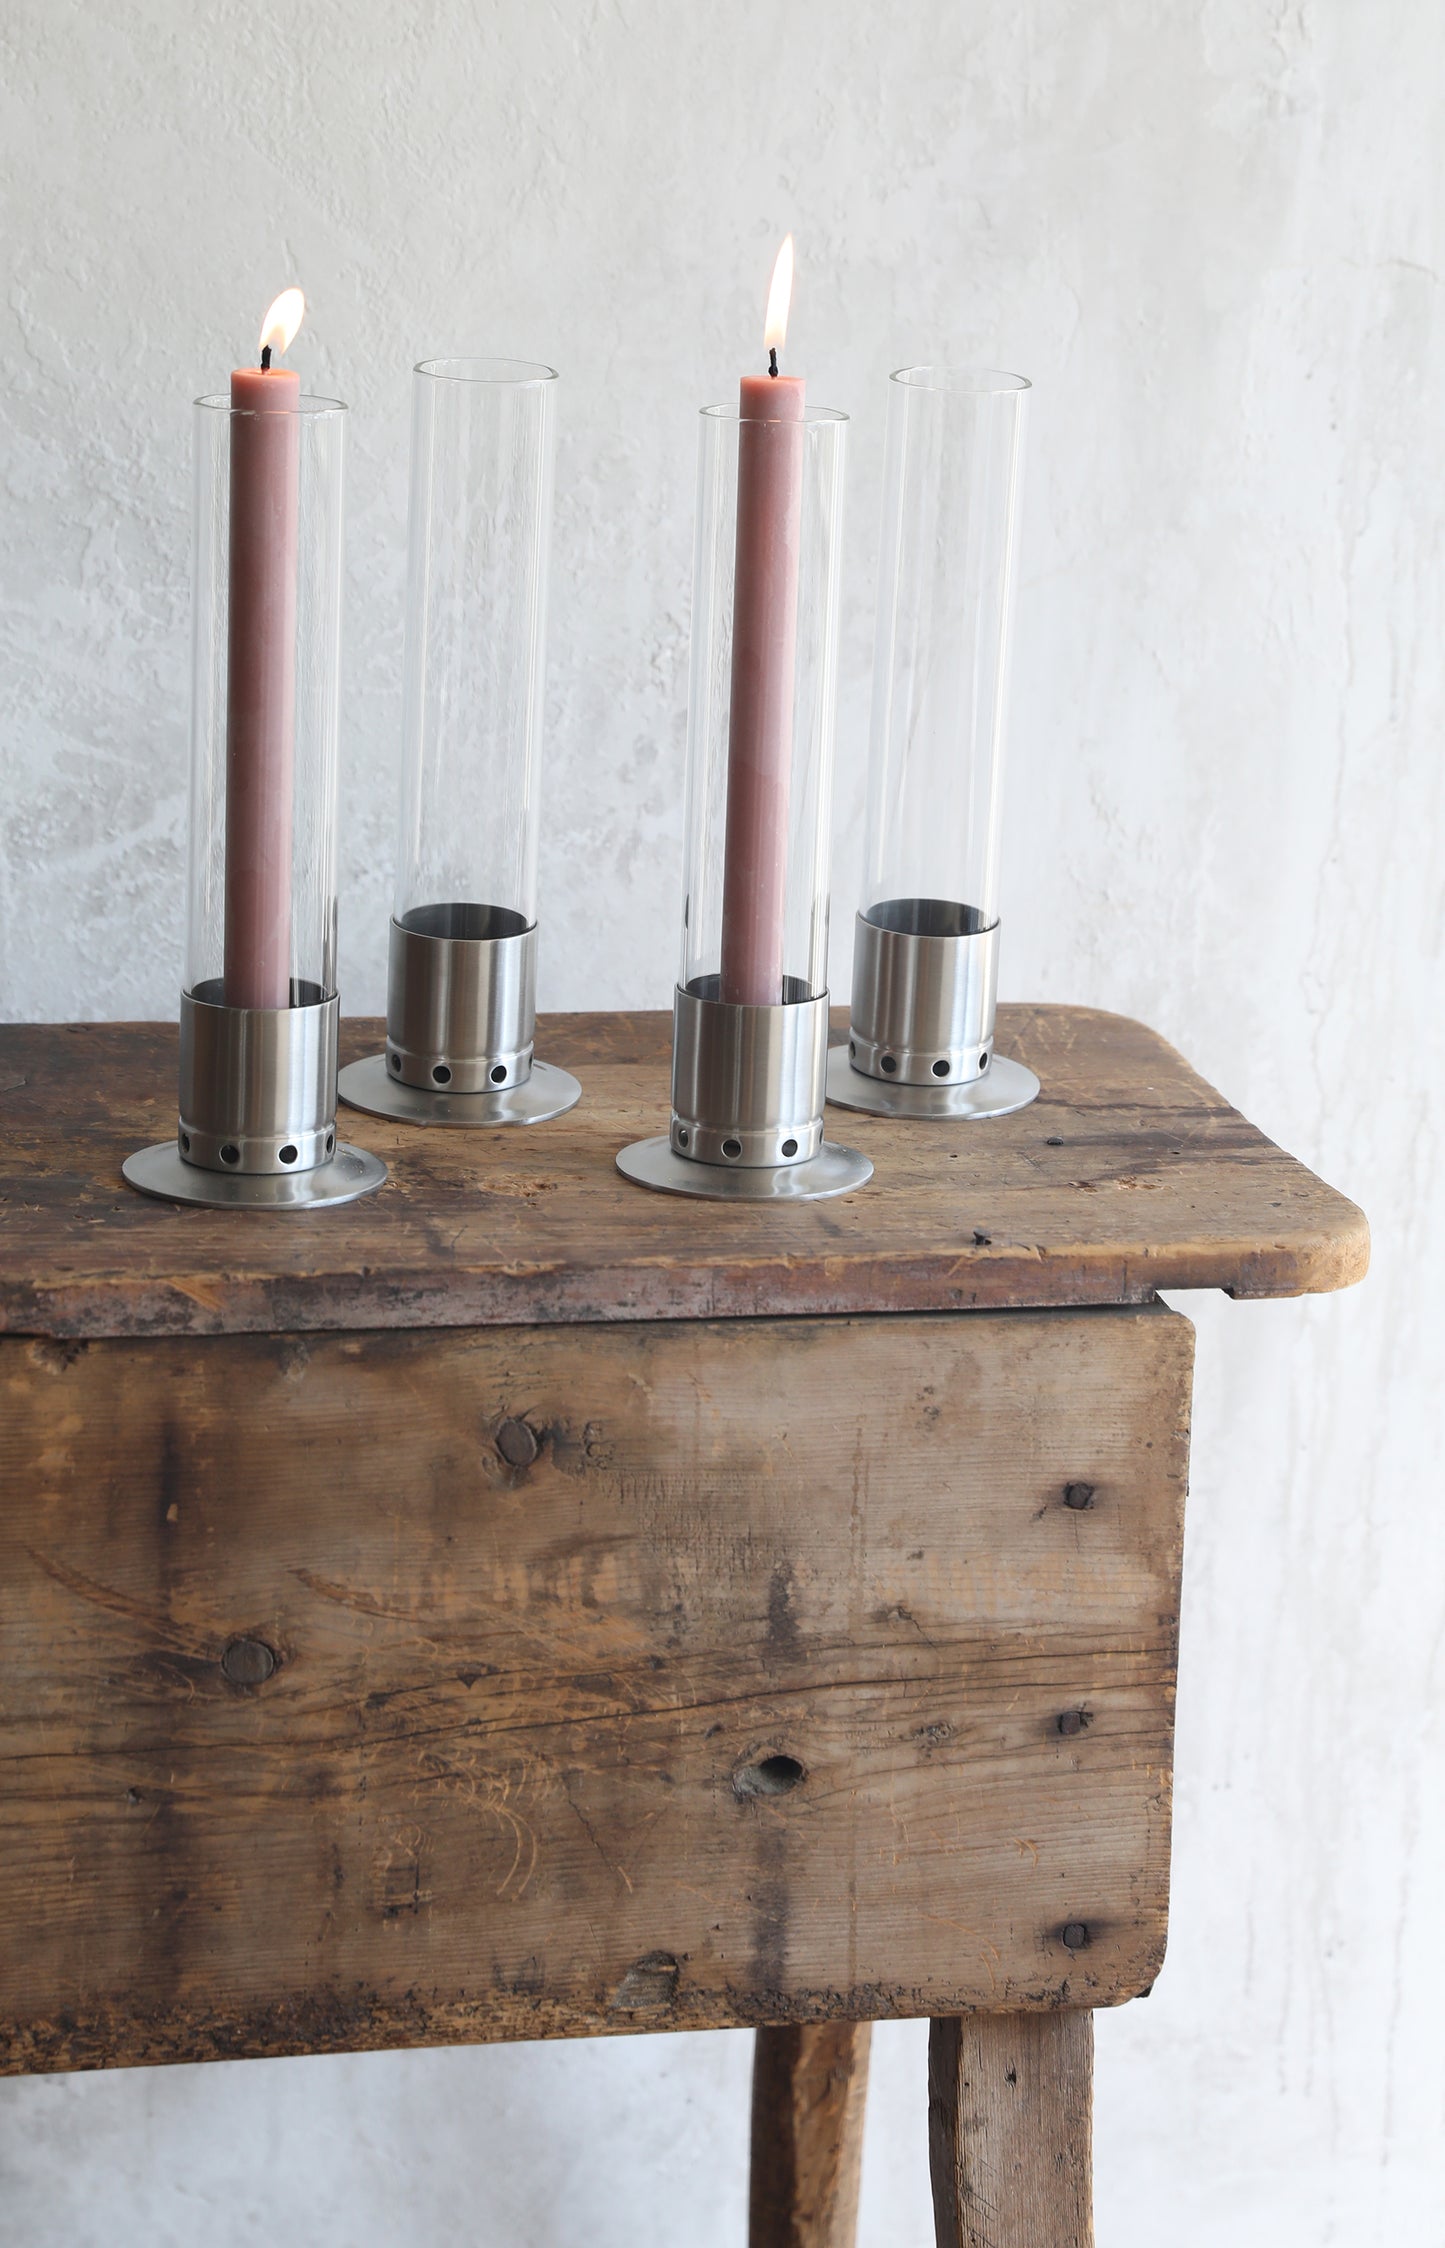 Stainless Steel Candle Holder